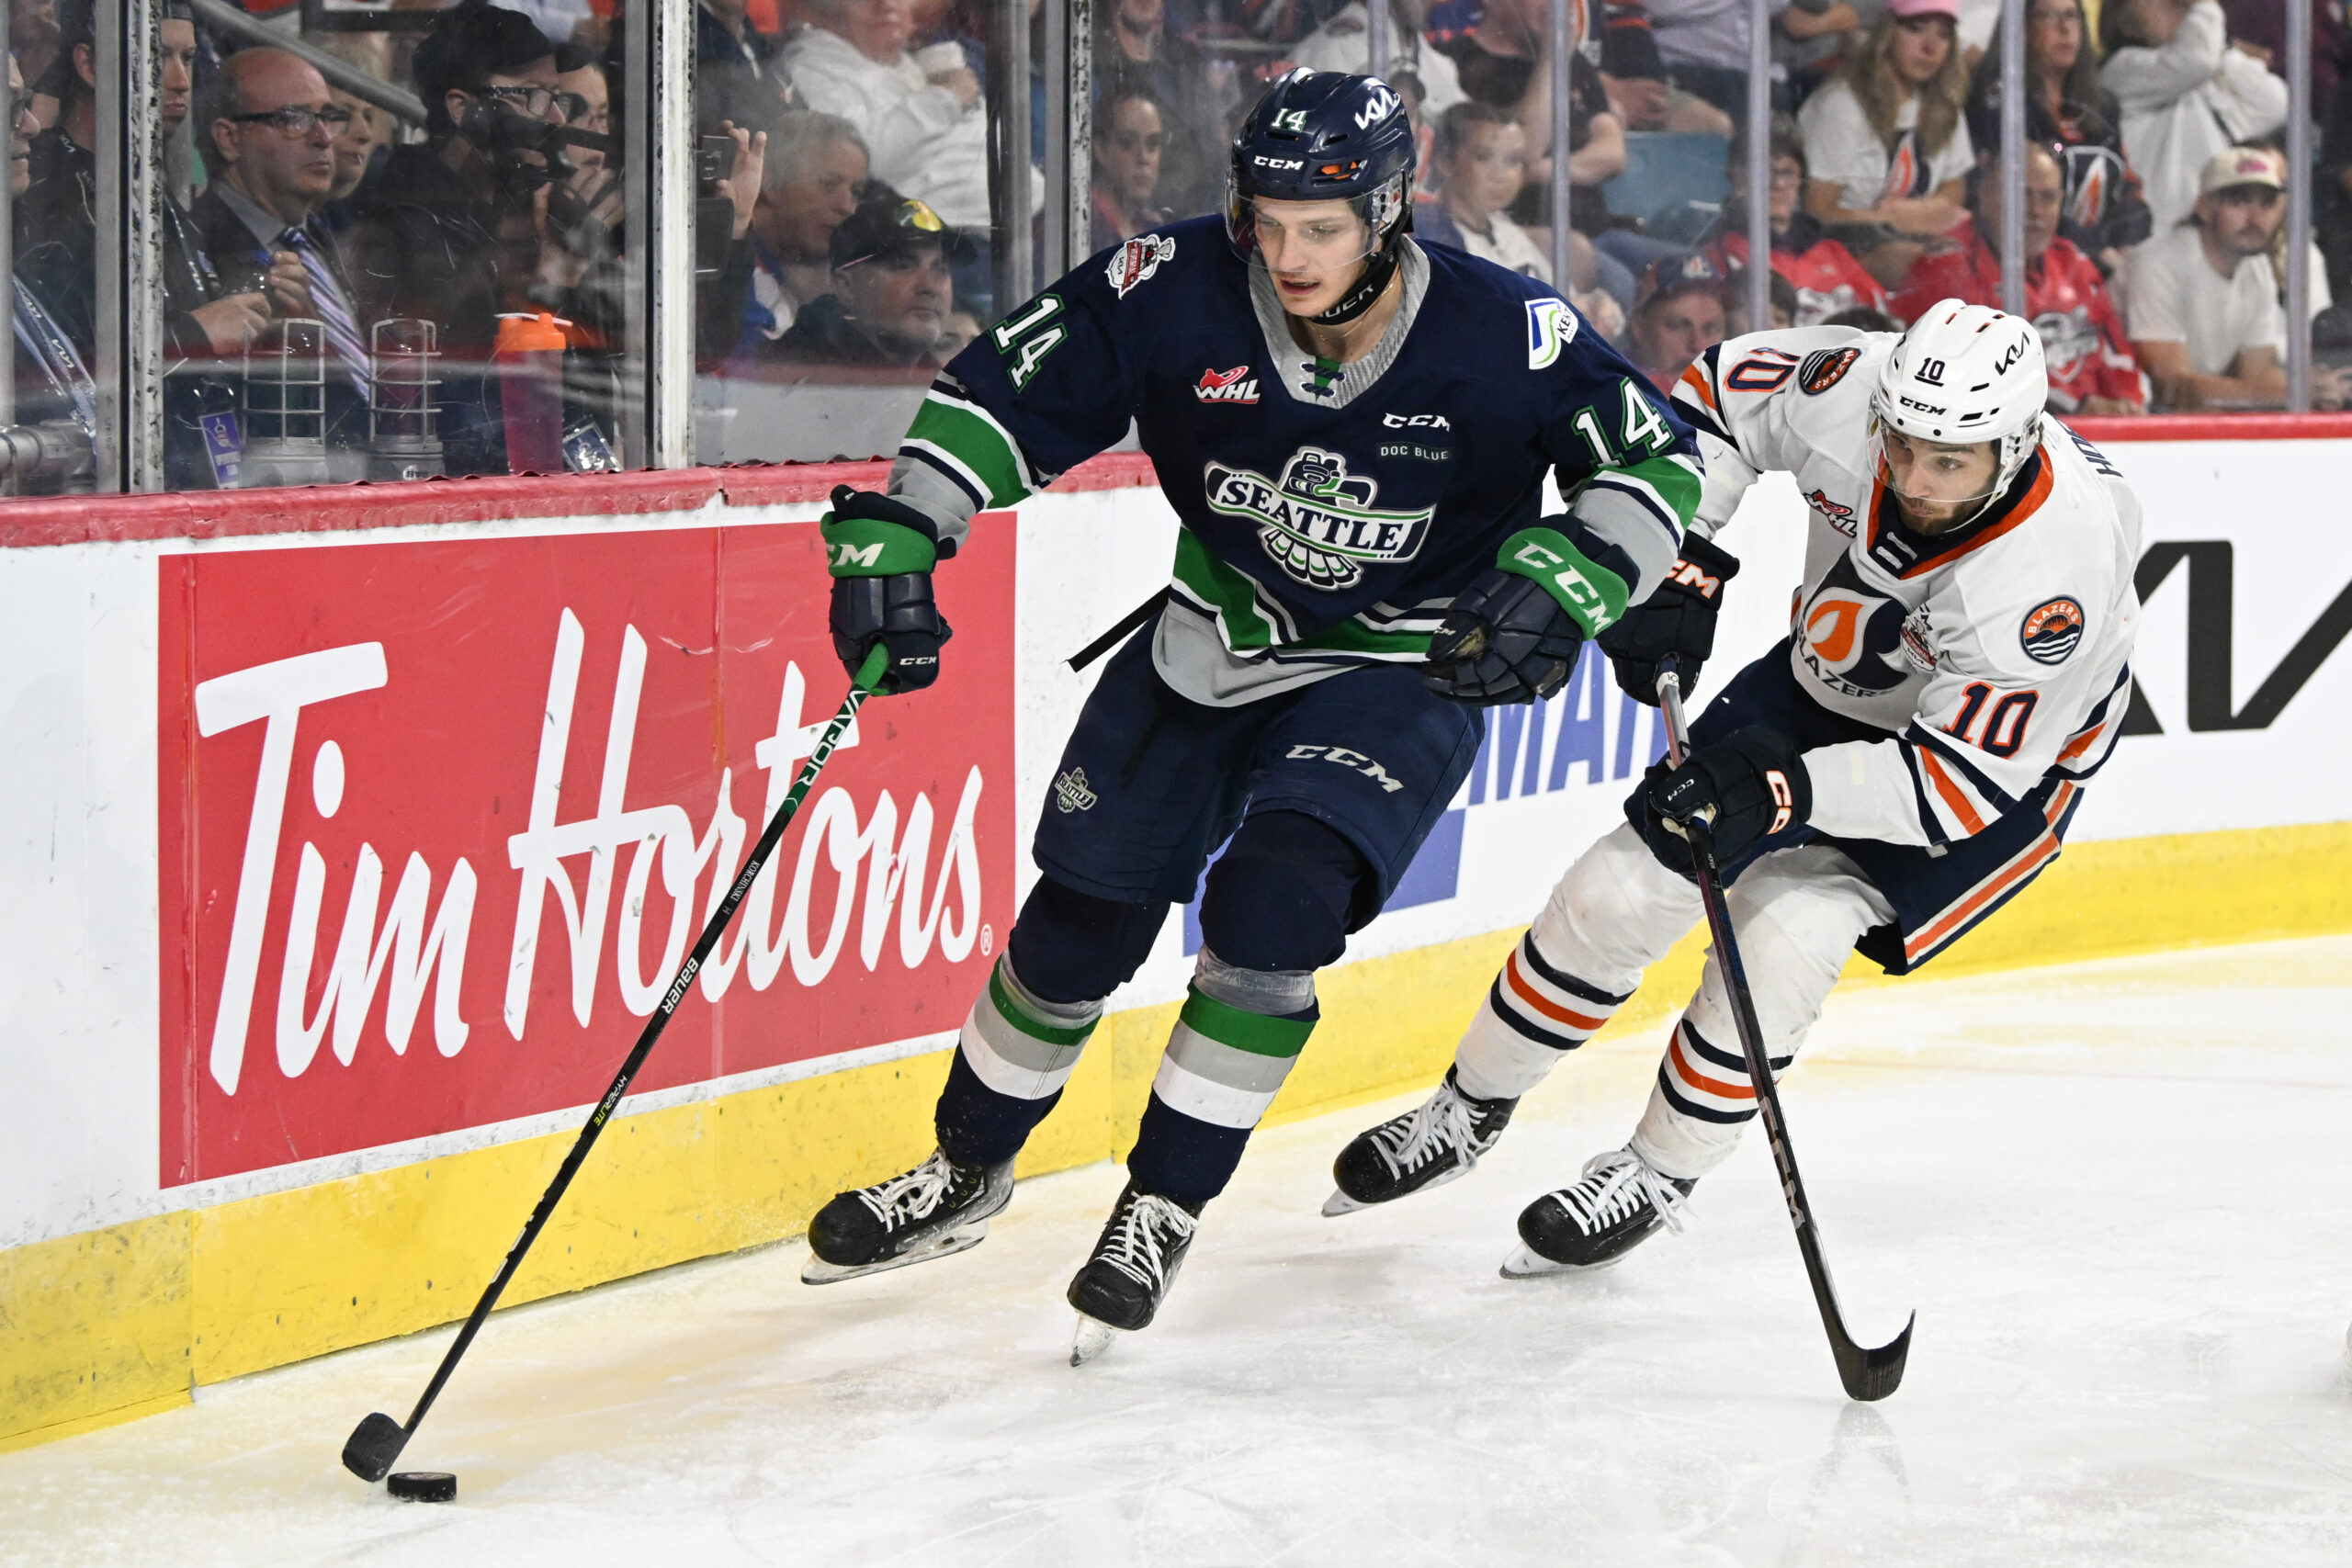 Seattle Thunderbirds build WHL super team by adding Dylan Guenther